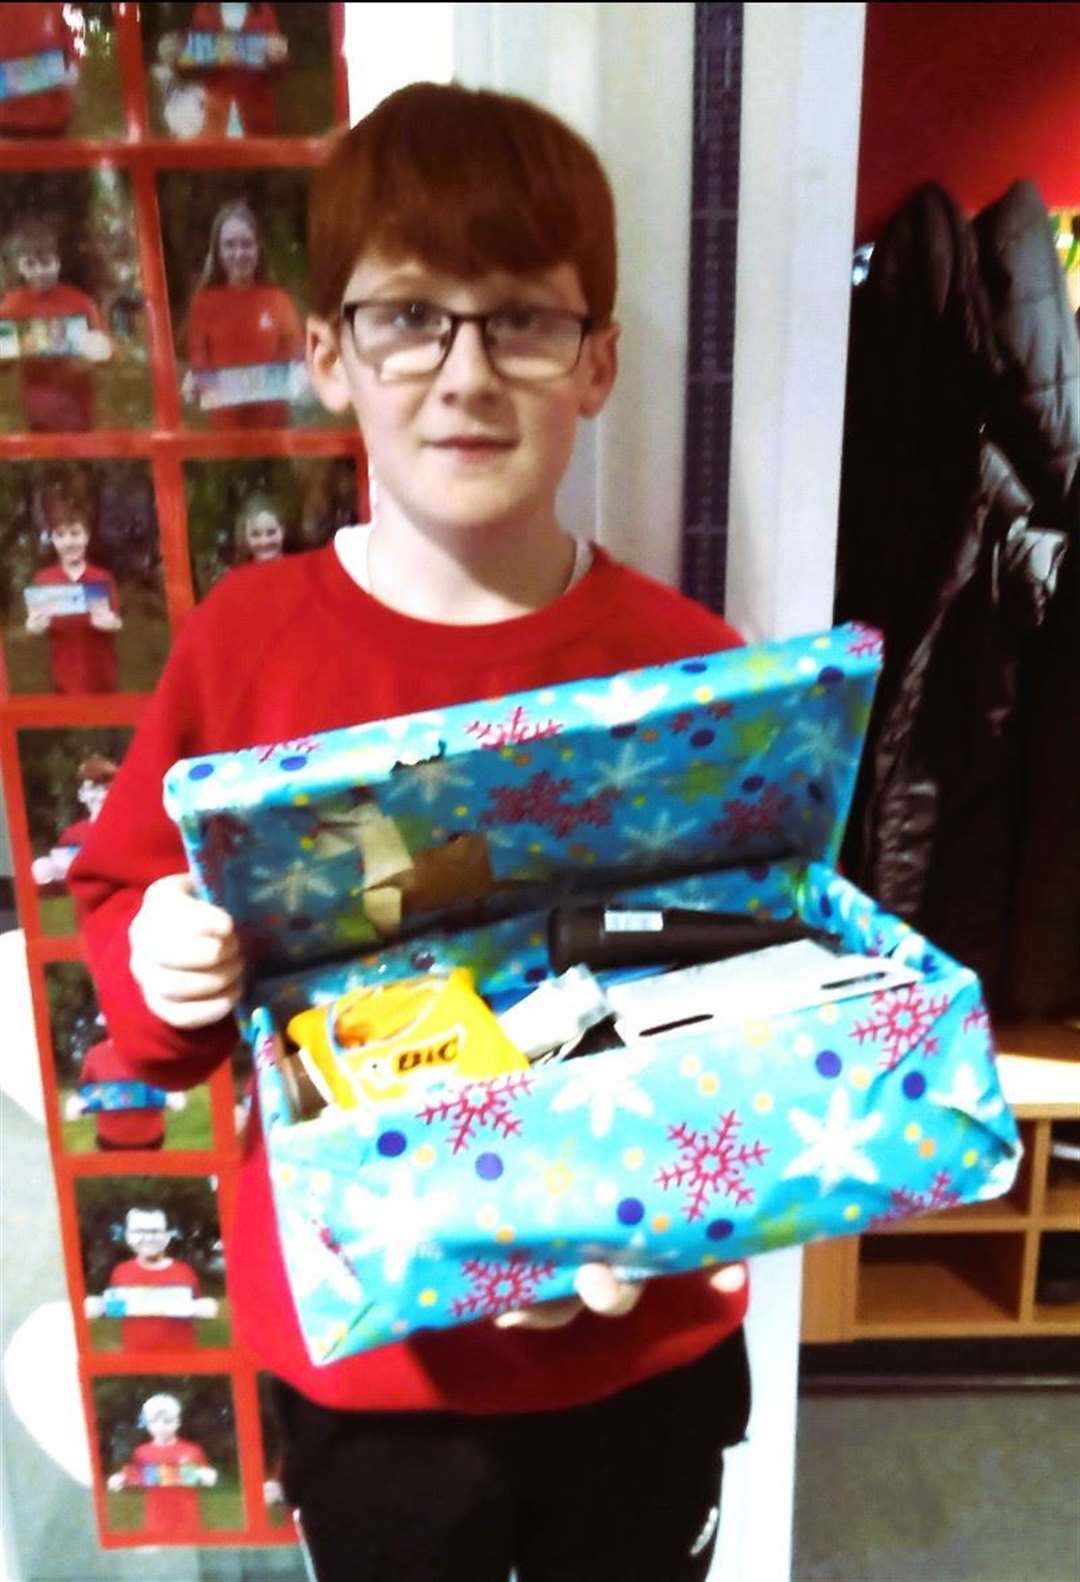 Callum P7 collected items for the Blythswood Appeal.